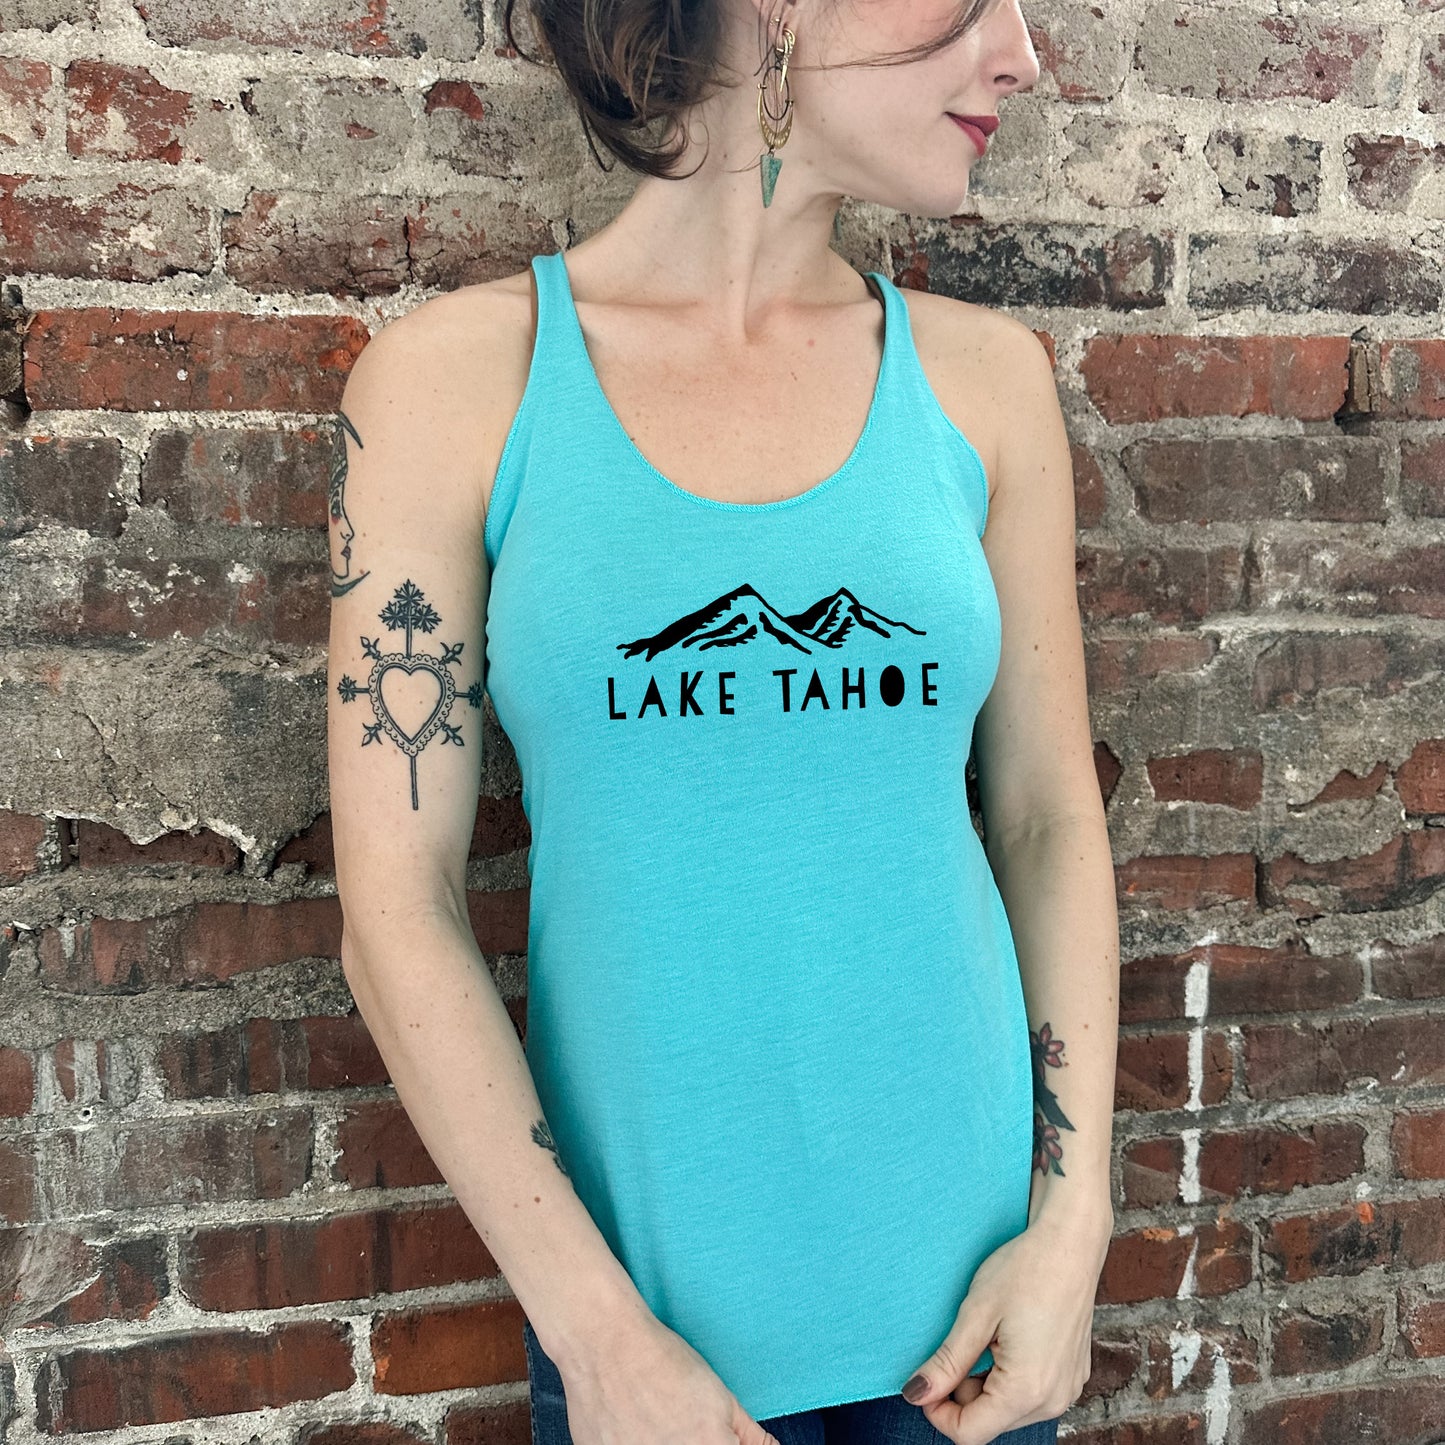 a woman wearing a lake tahoe tank top standing in front of a brick wall